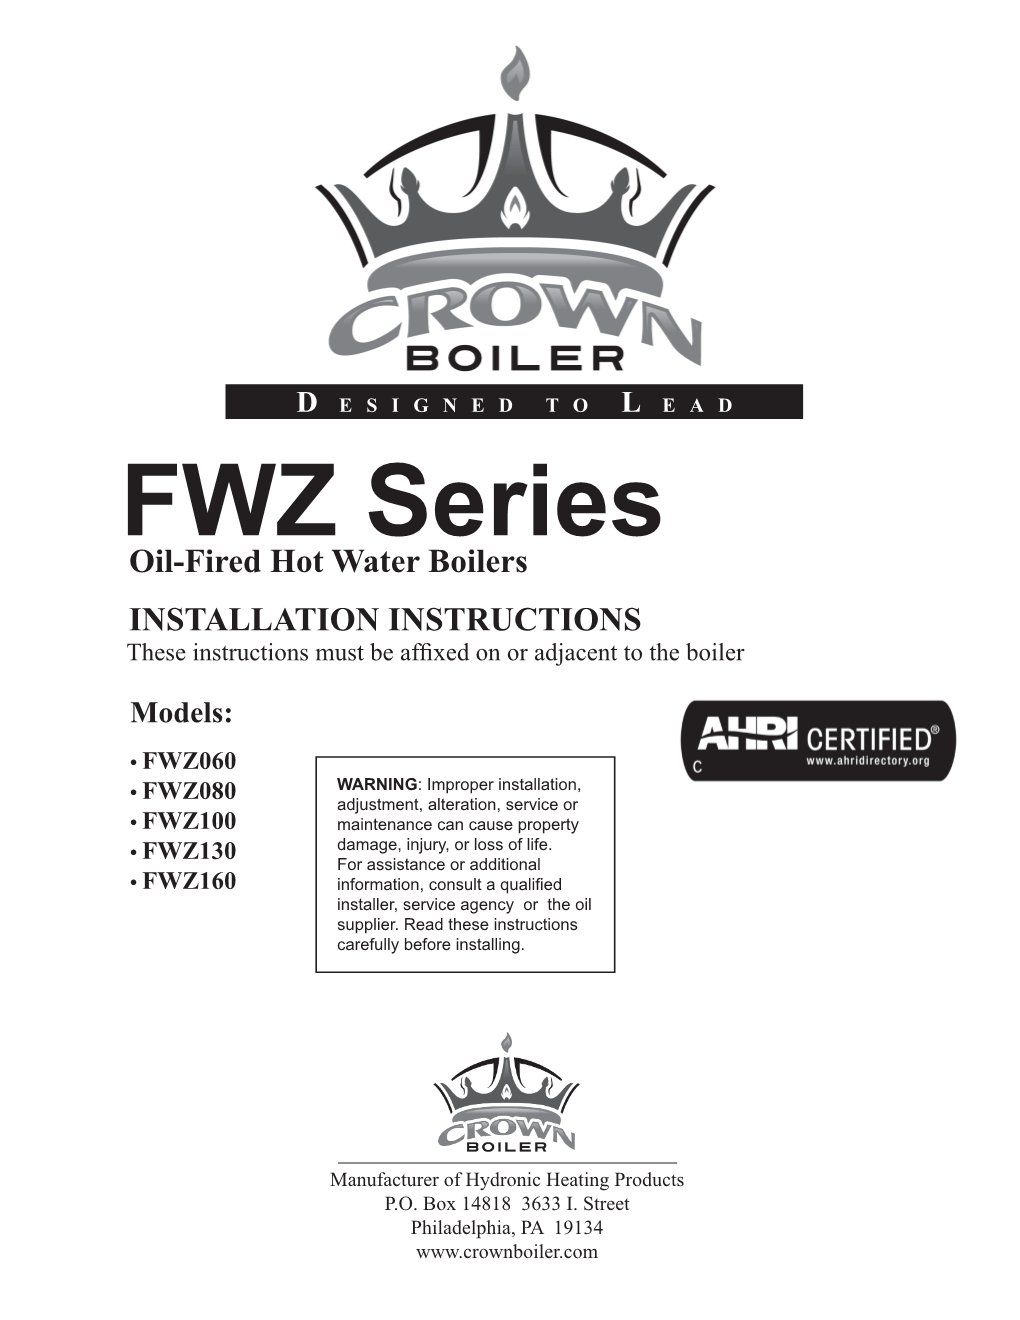 FWZ Series Boiler Is a Cast Iron Oil-Fired Water Boiler Designed for Use in Closed Forced Circulation Heating Systems